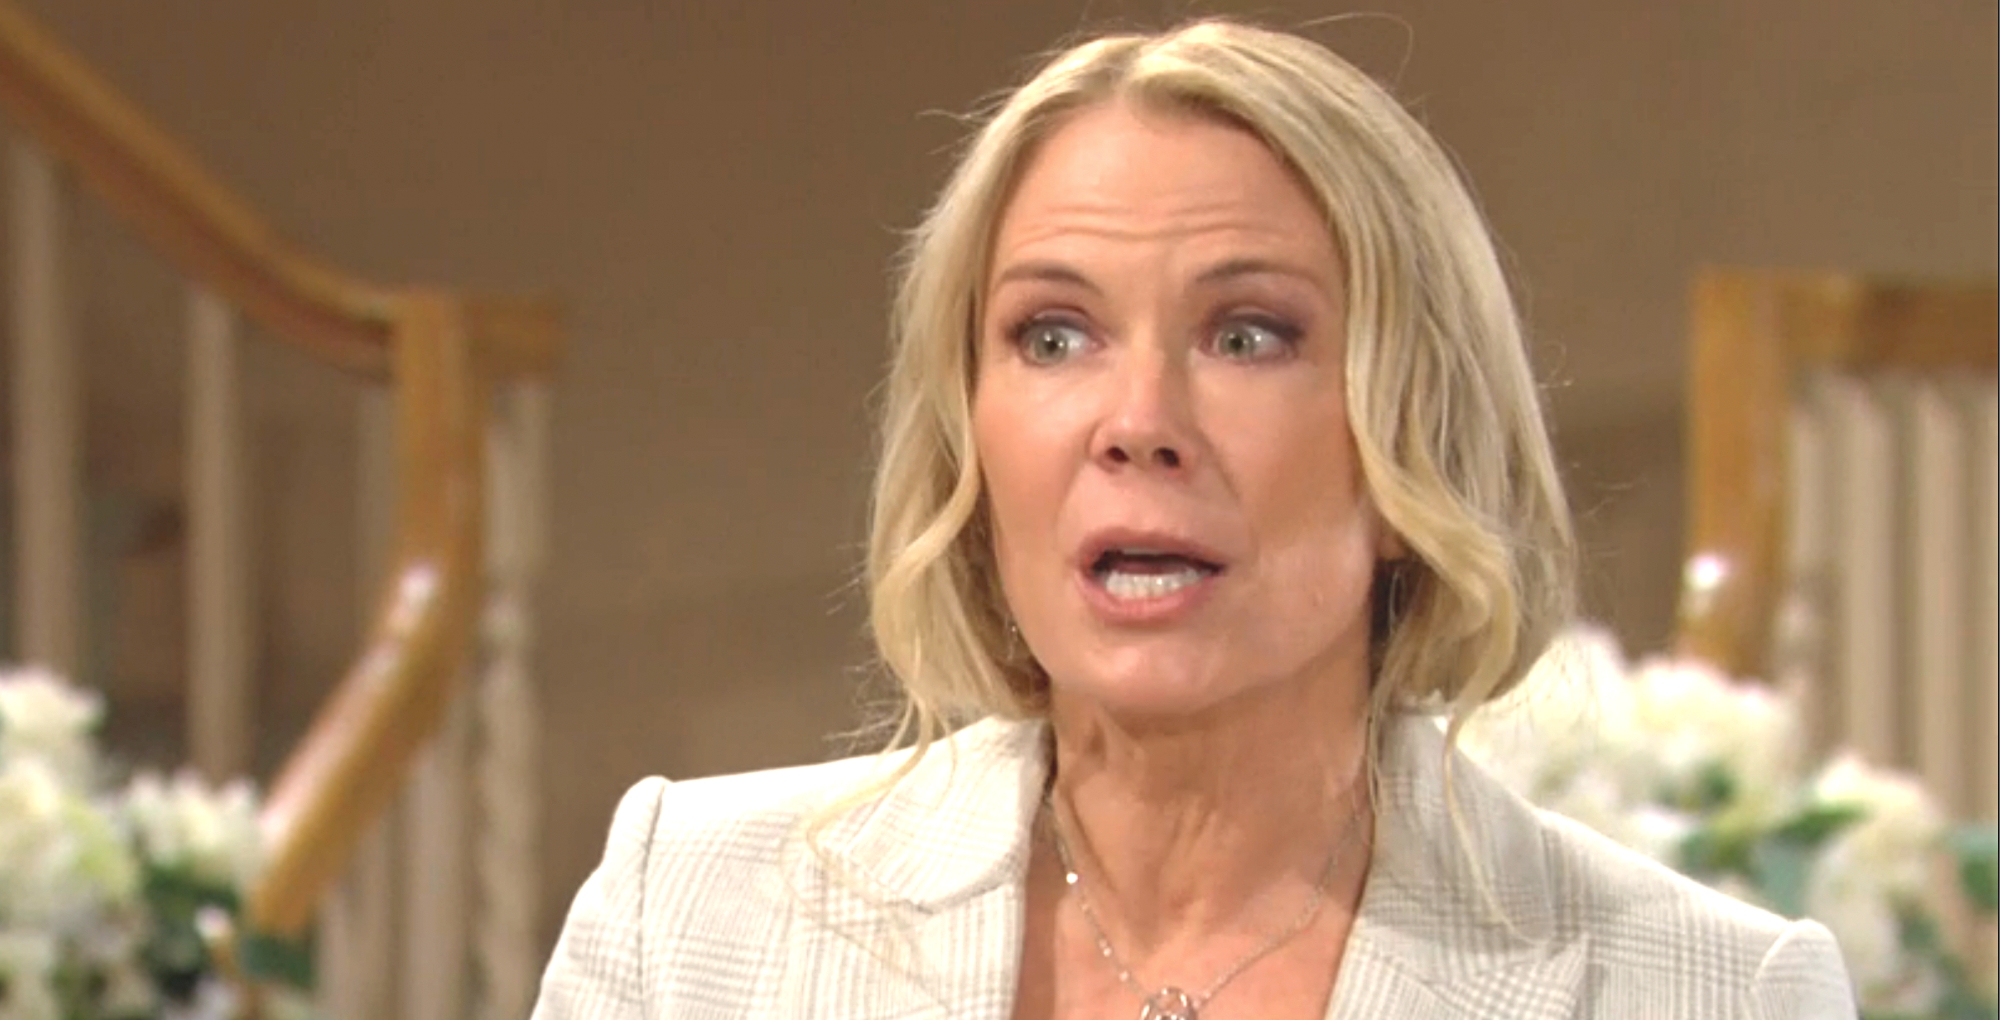 bold and the beautiful spoilers show brooke logan in white at the forrester mansion